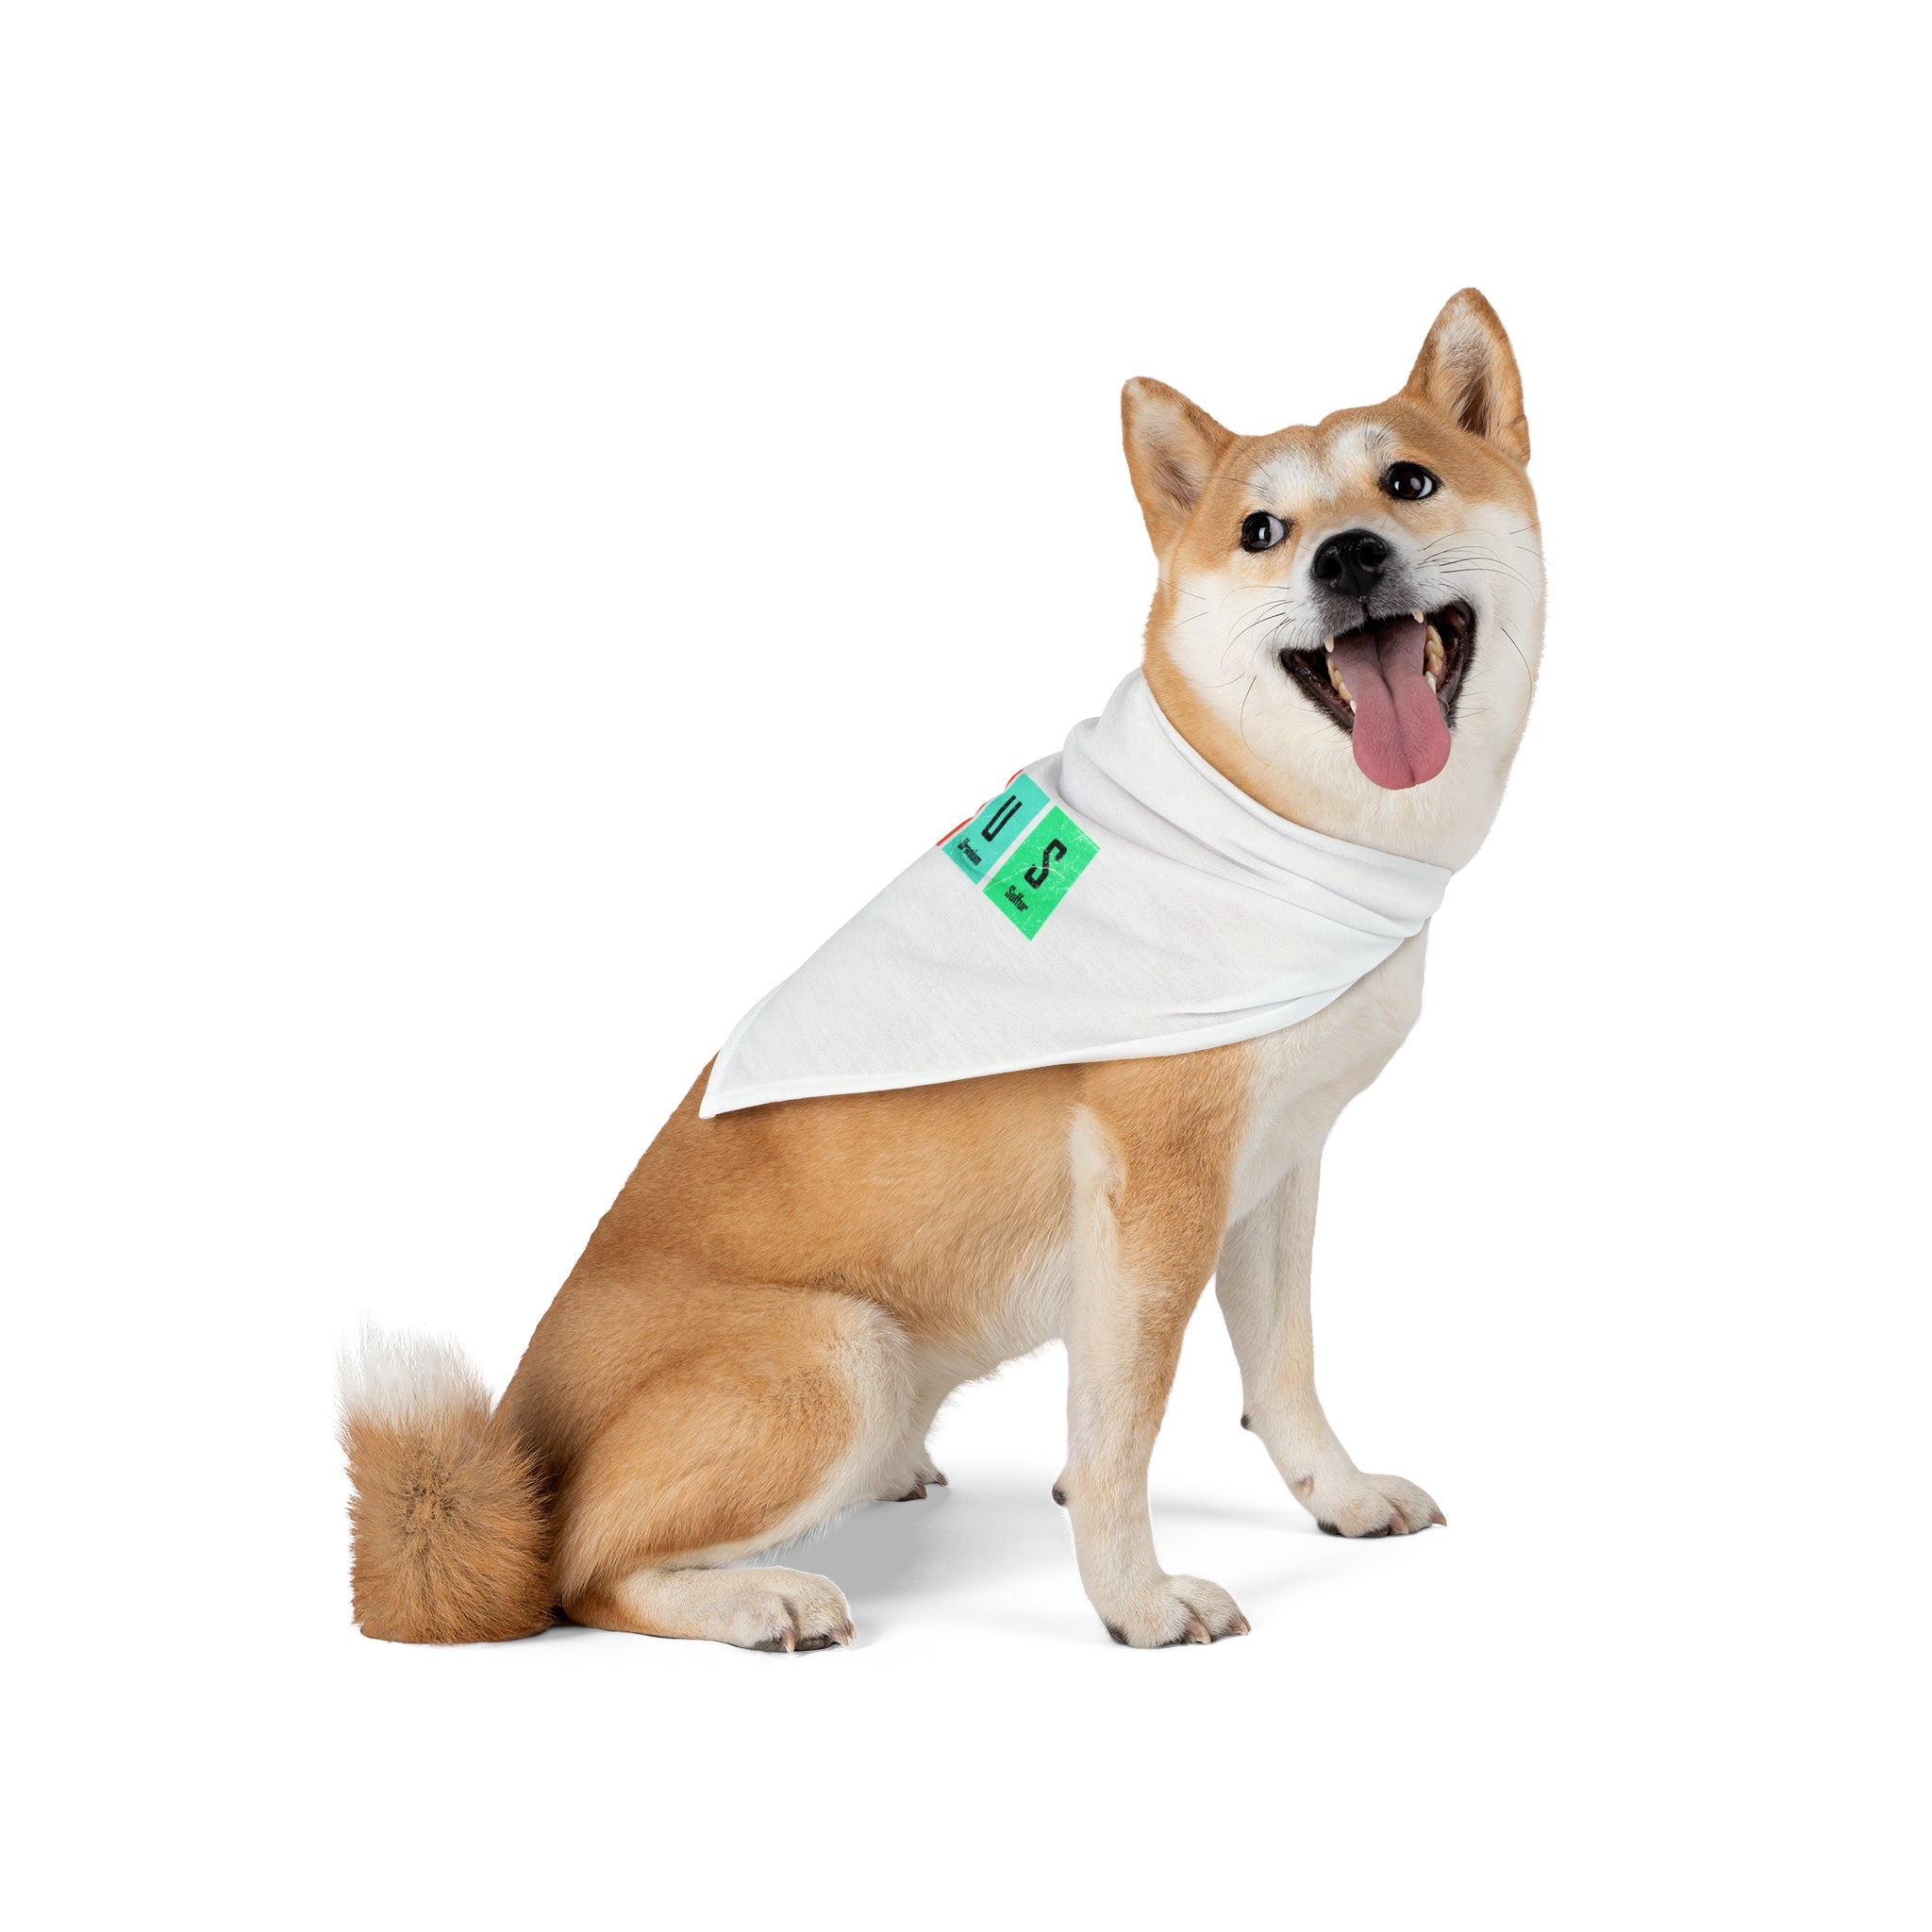 A Shiba Inu wearing a Ge-Ni-U-S - Pet Bandana adorned with colorful patches sits on a white background, looking up with an open mouth and tongue out. Perfect for design-loving pets!